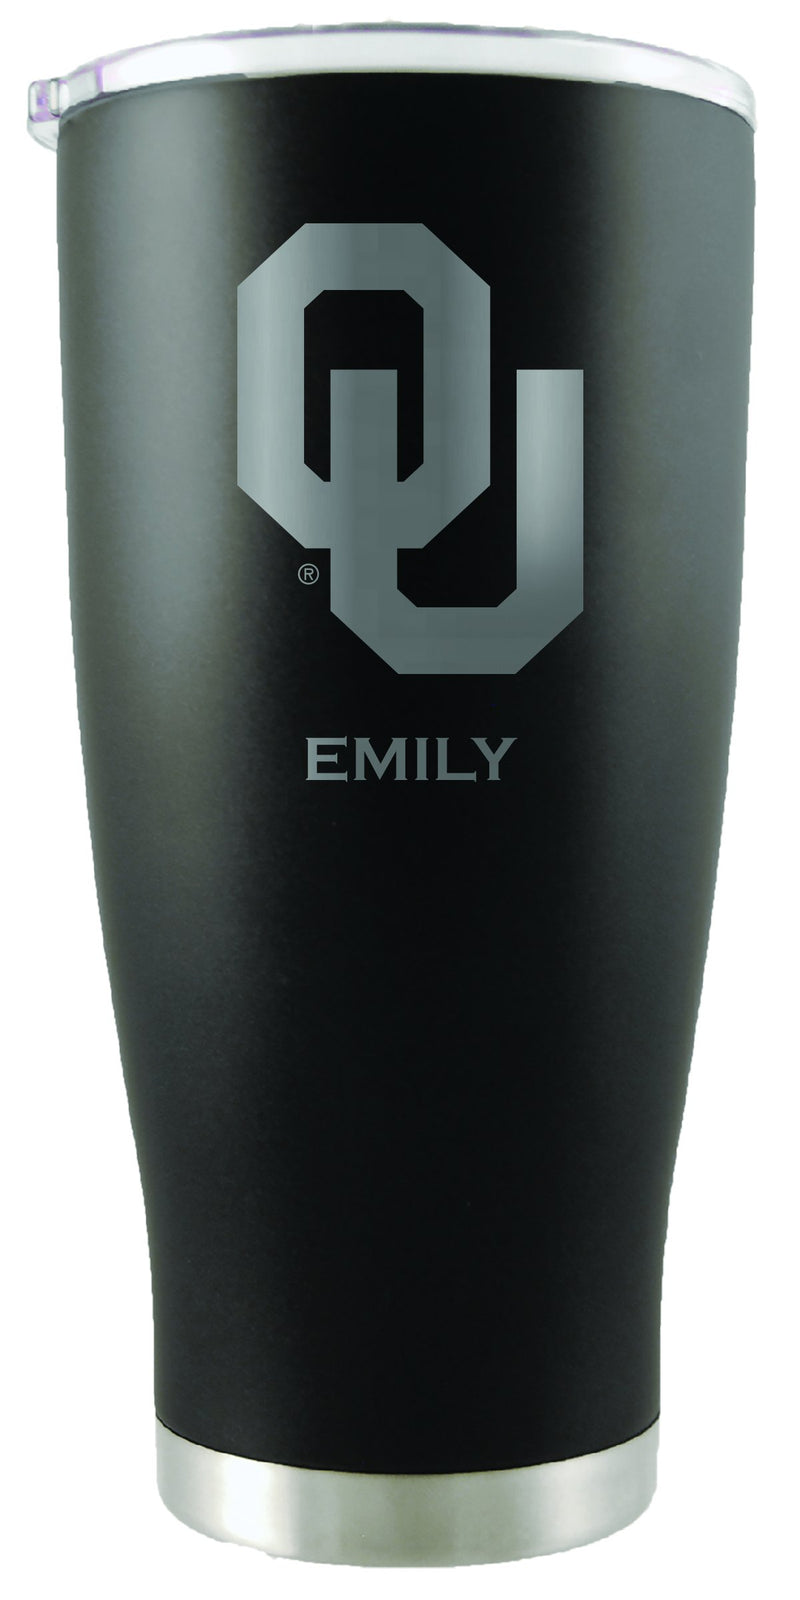 20oz Black Personalized Stainless Steel Tumbler | Oklahoma
COL, CurrentProduct, Drinkware_category_All, OK, Oklahoma Sooners, Personalized_Personalized
The Memory Company